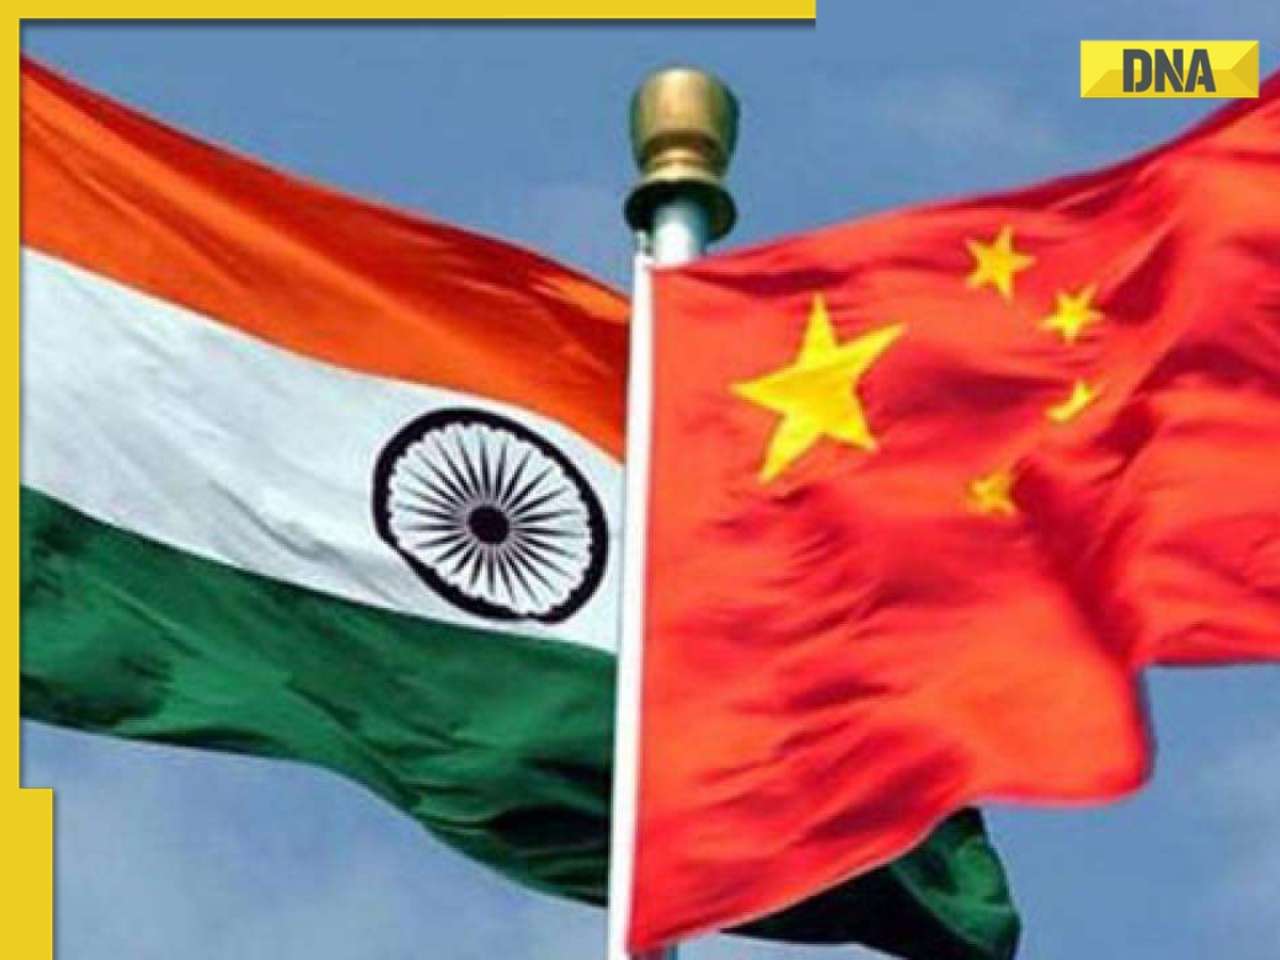 'Respect for LAC essential for...': India, China hold diplomatic talks on eastern Ladakh standoff 